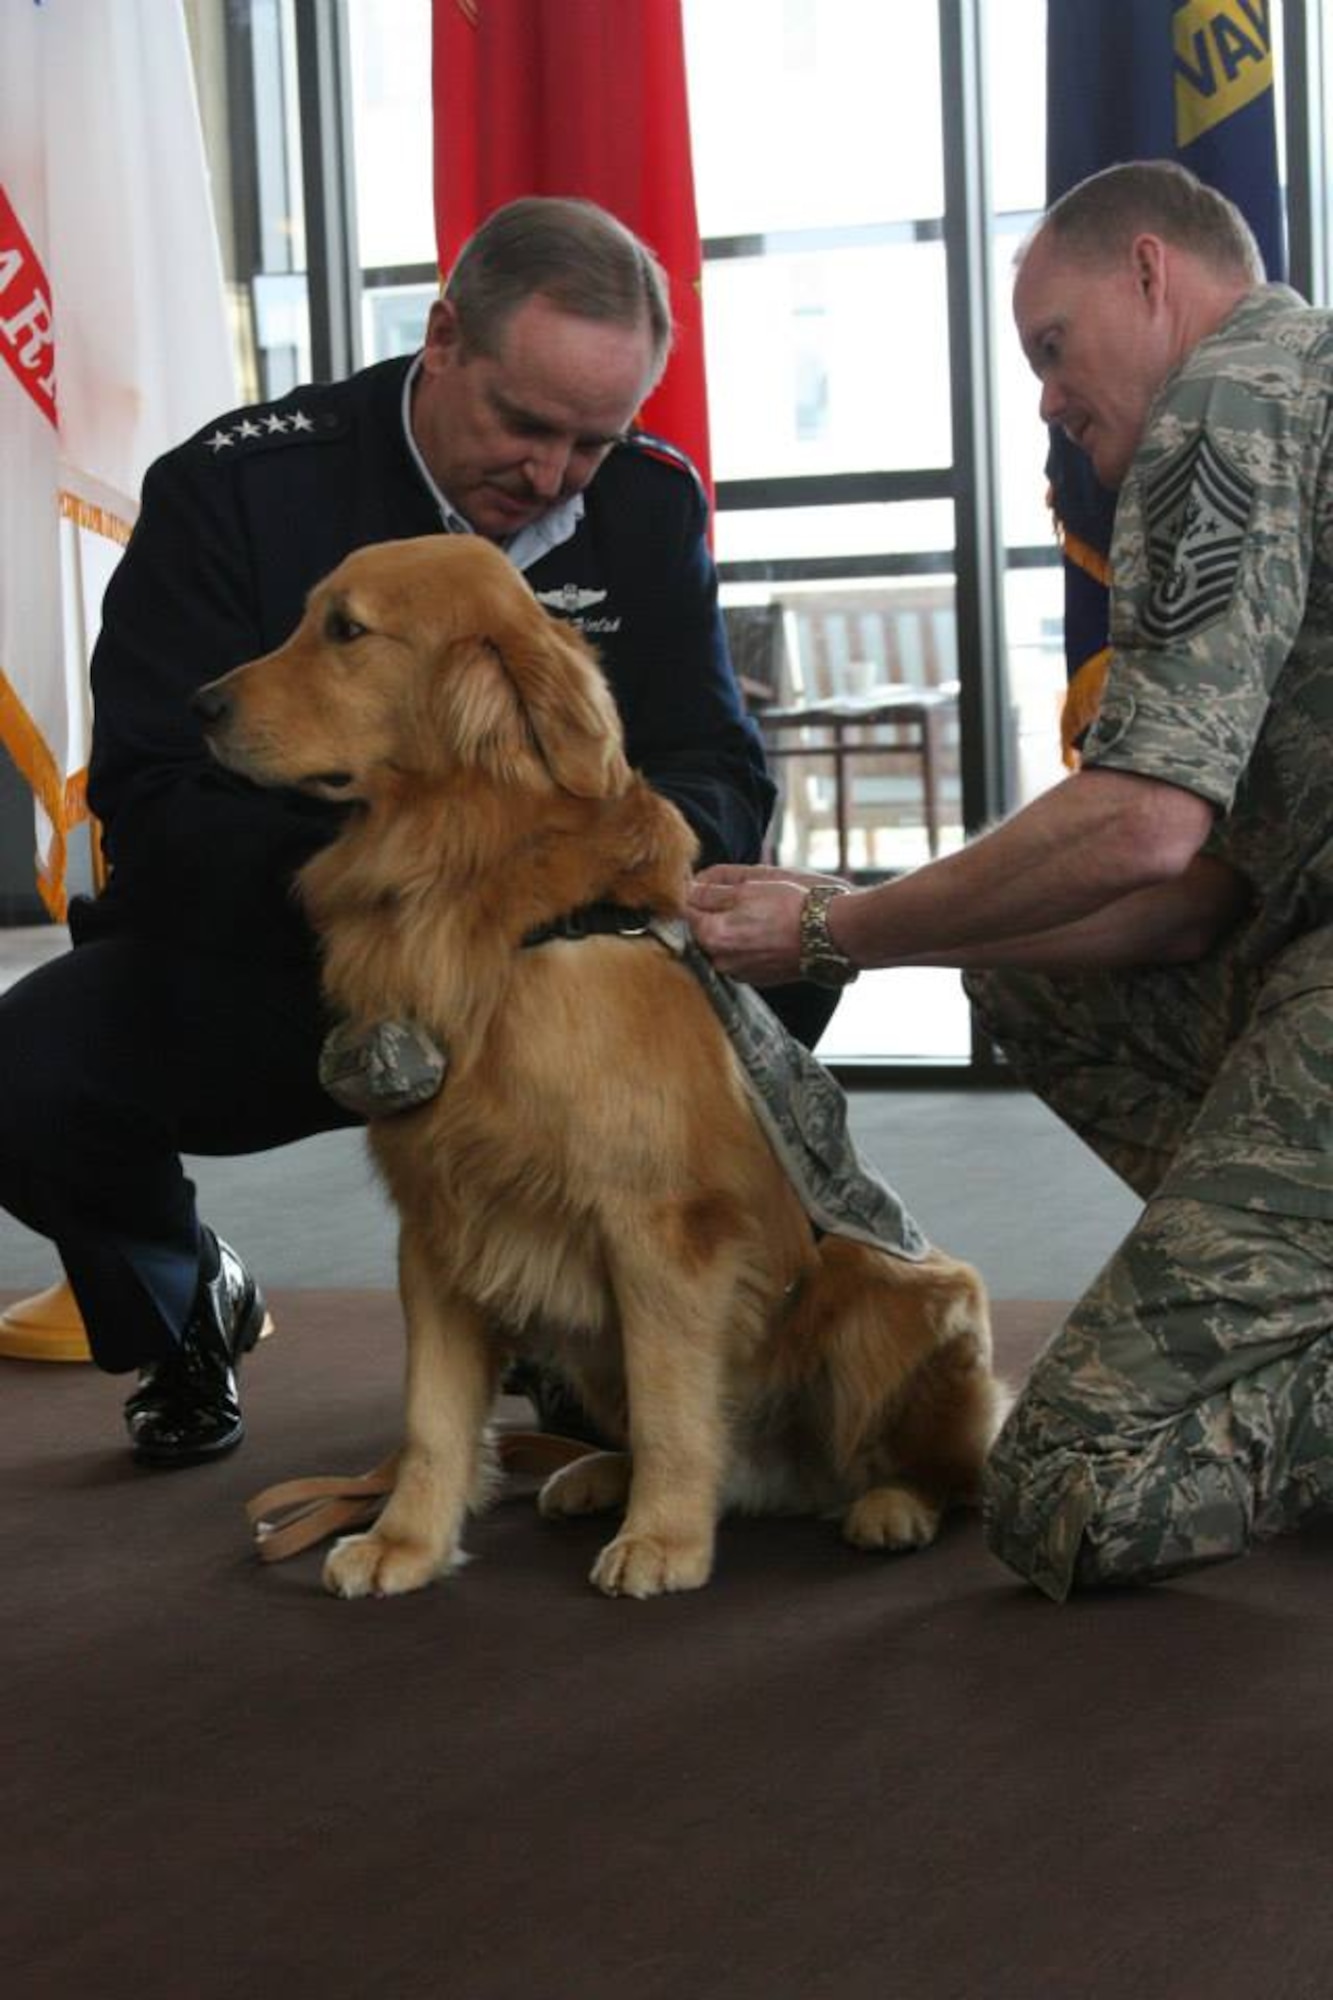 The Air Force Chief of Staff, Gen. Mark A. Welsh III, and Chief Master Sgt. of the Air Force, James A. Cody, commission Goldie, a Golden Retriever’s as a second lieutenant in the therapy dog programat at Walter Reed National Military Medical Center on March 12. (Photo by Bernard S. Little)